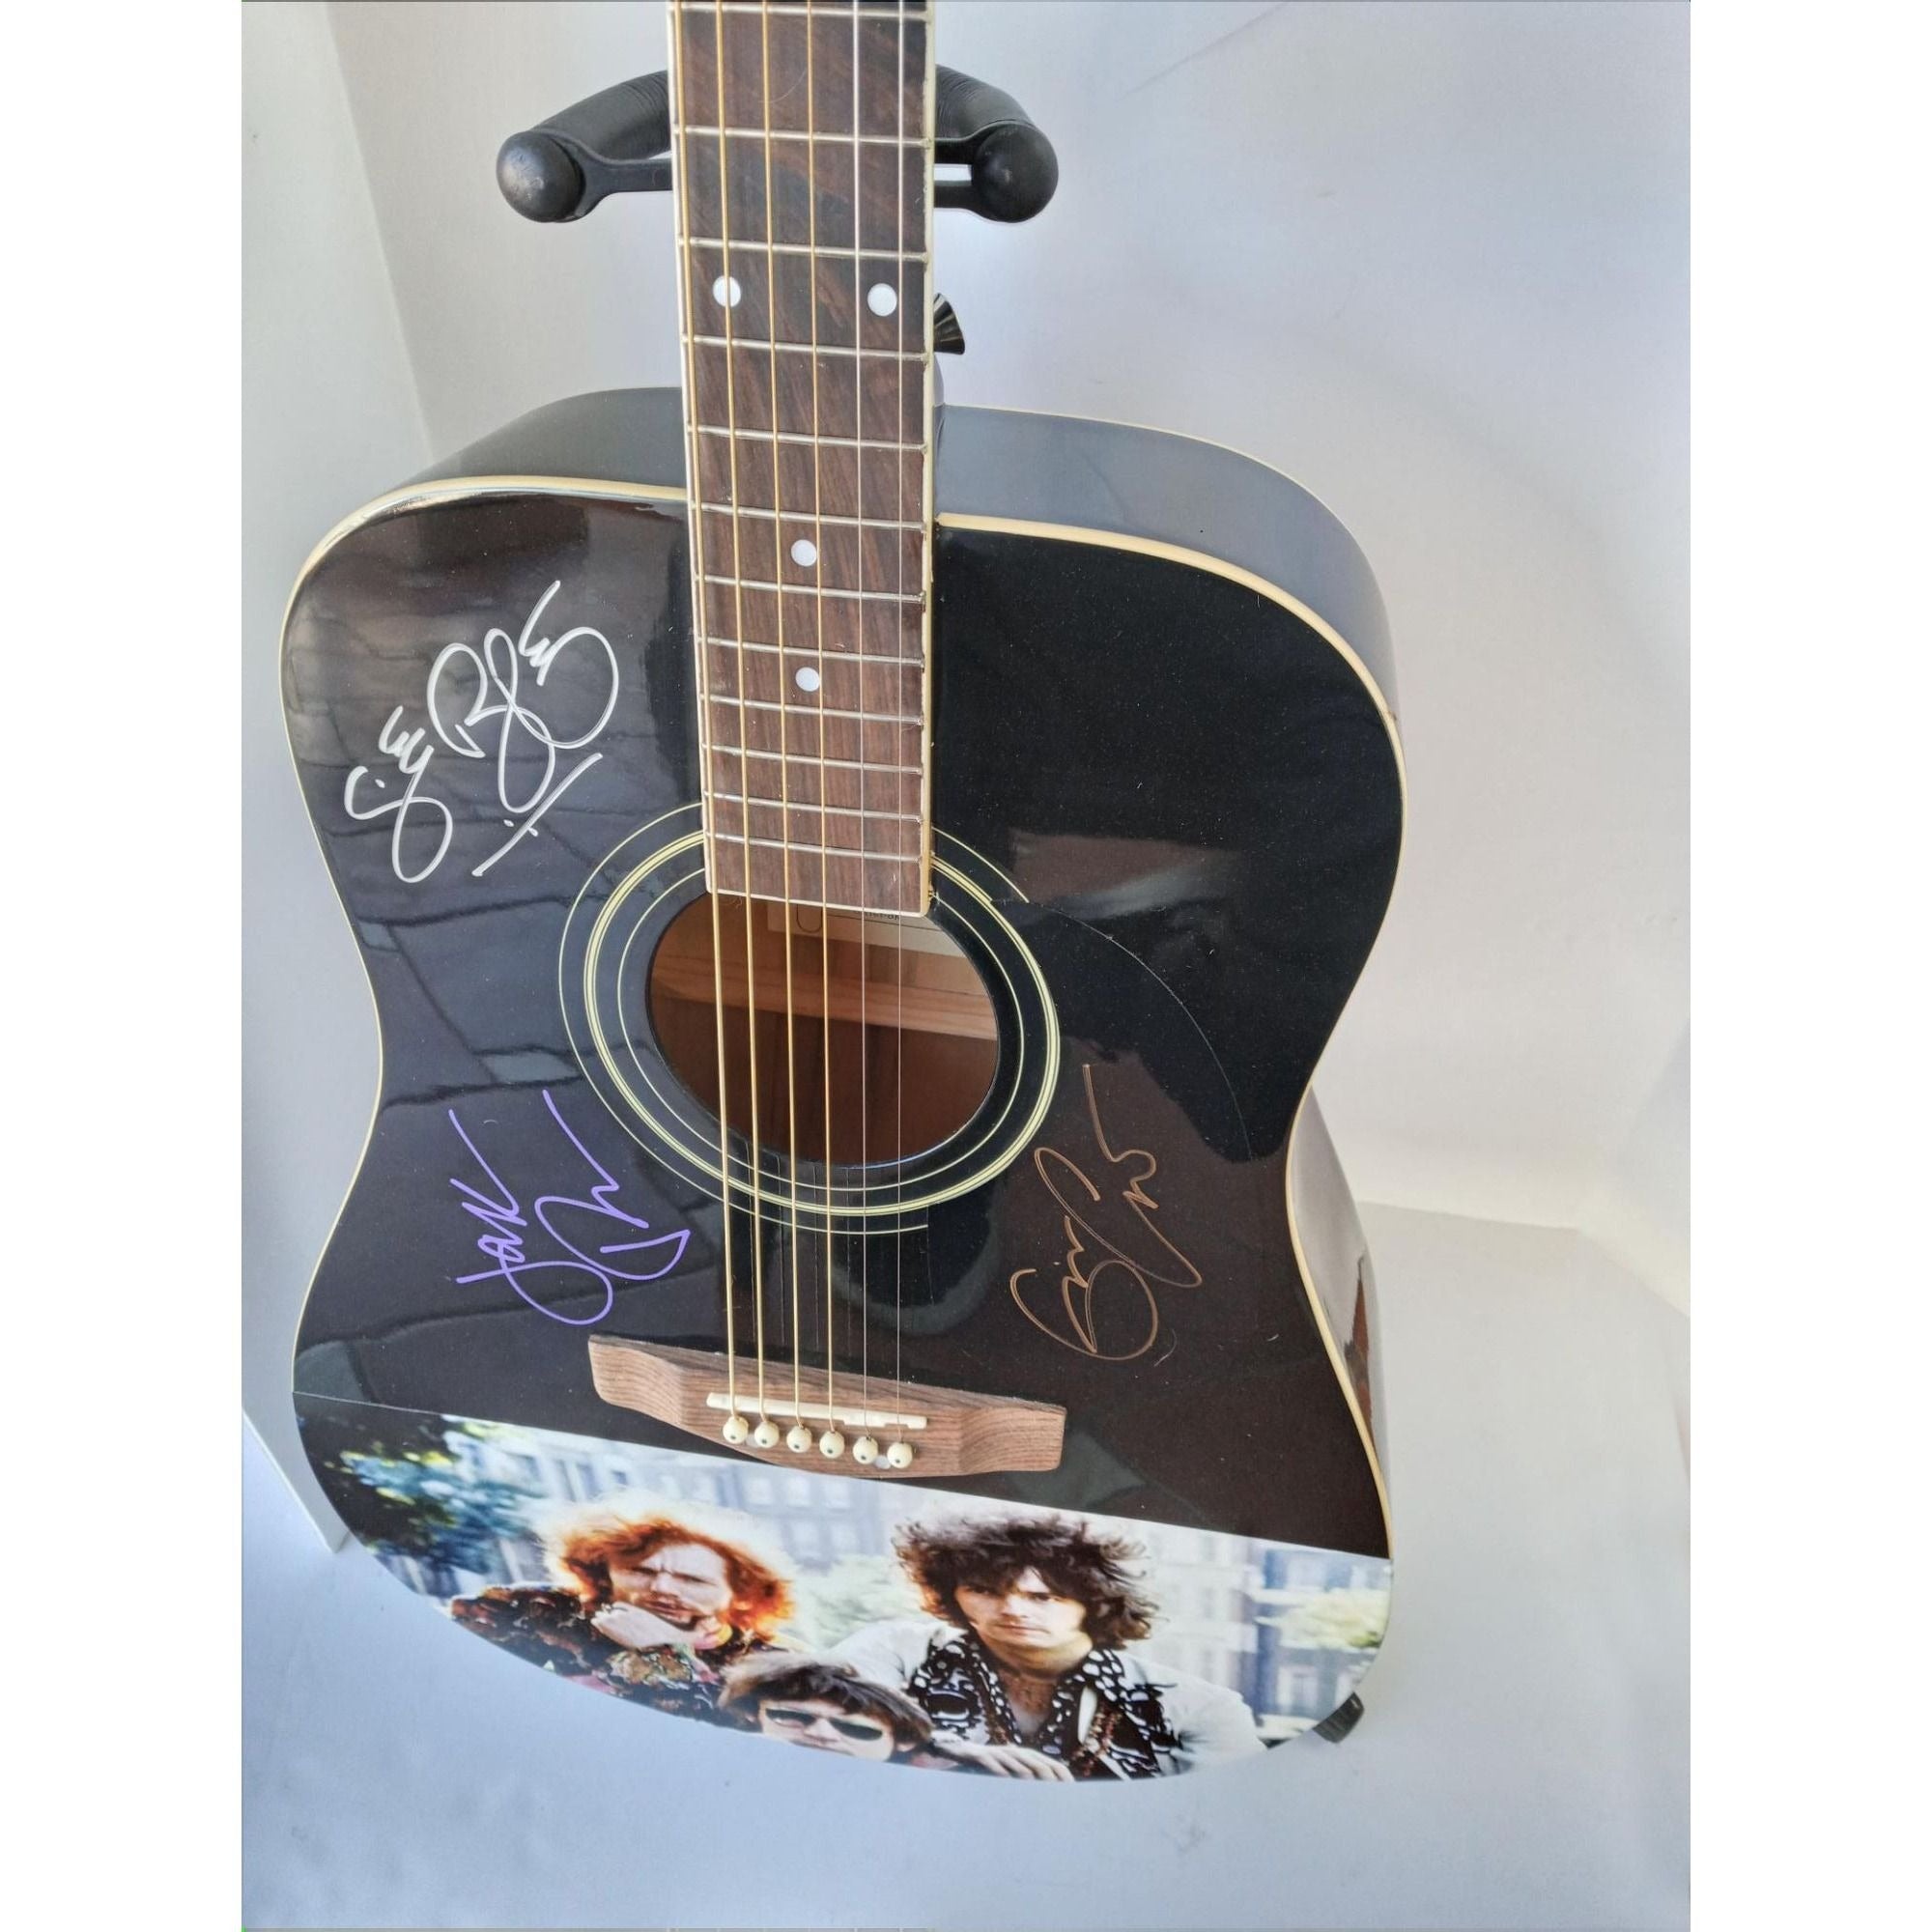 Cream Eric Clapton Ginger Baker Jack Bruce one of a kind 39' acoustic guitar signed & framed 20x46x8 with proof